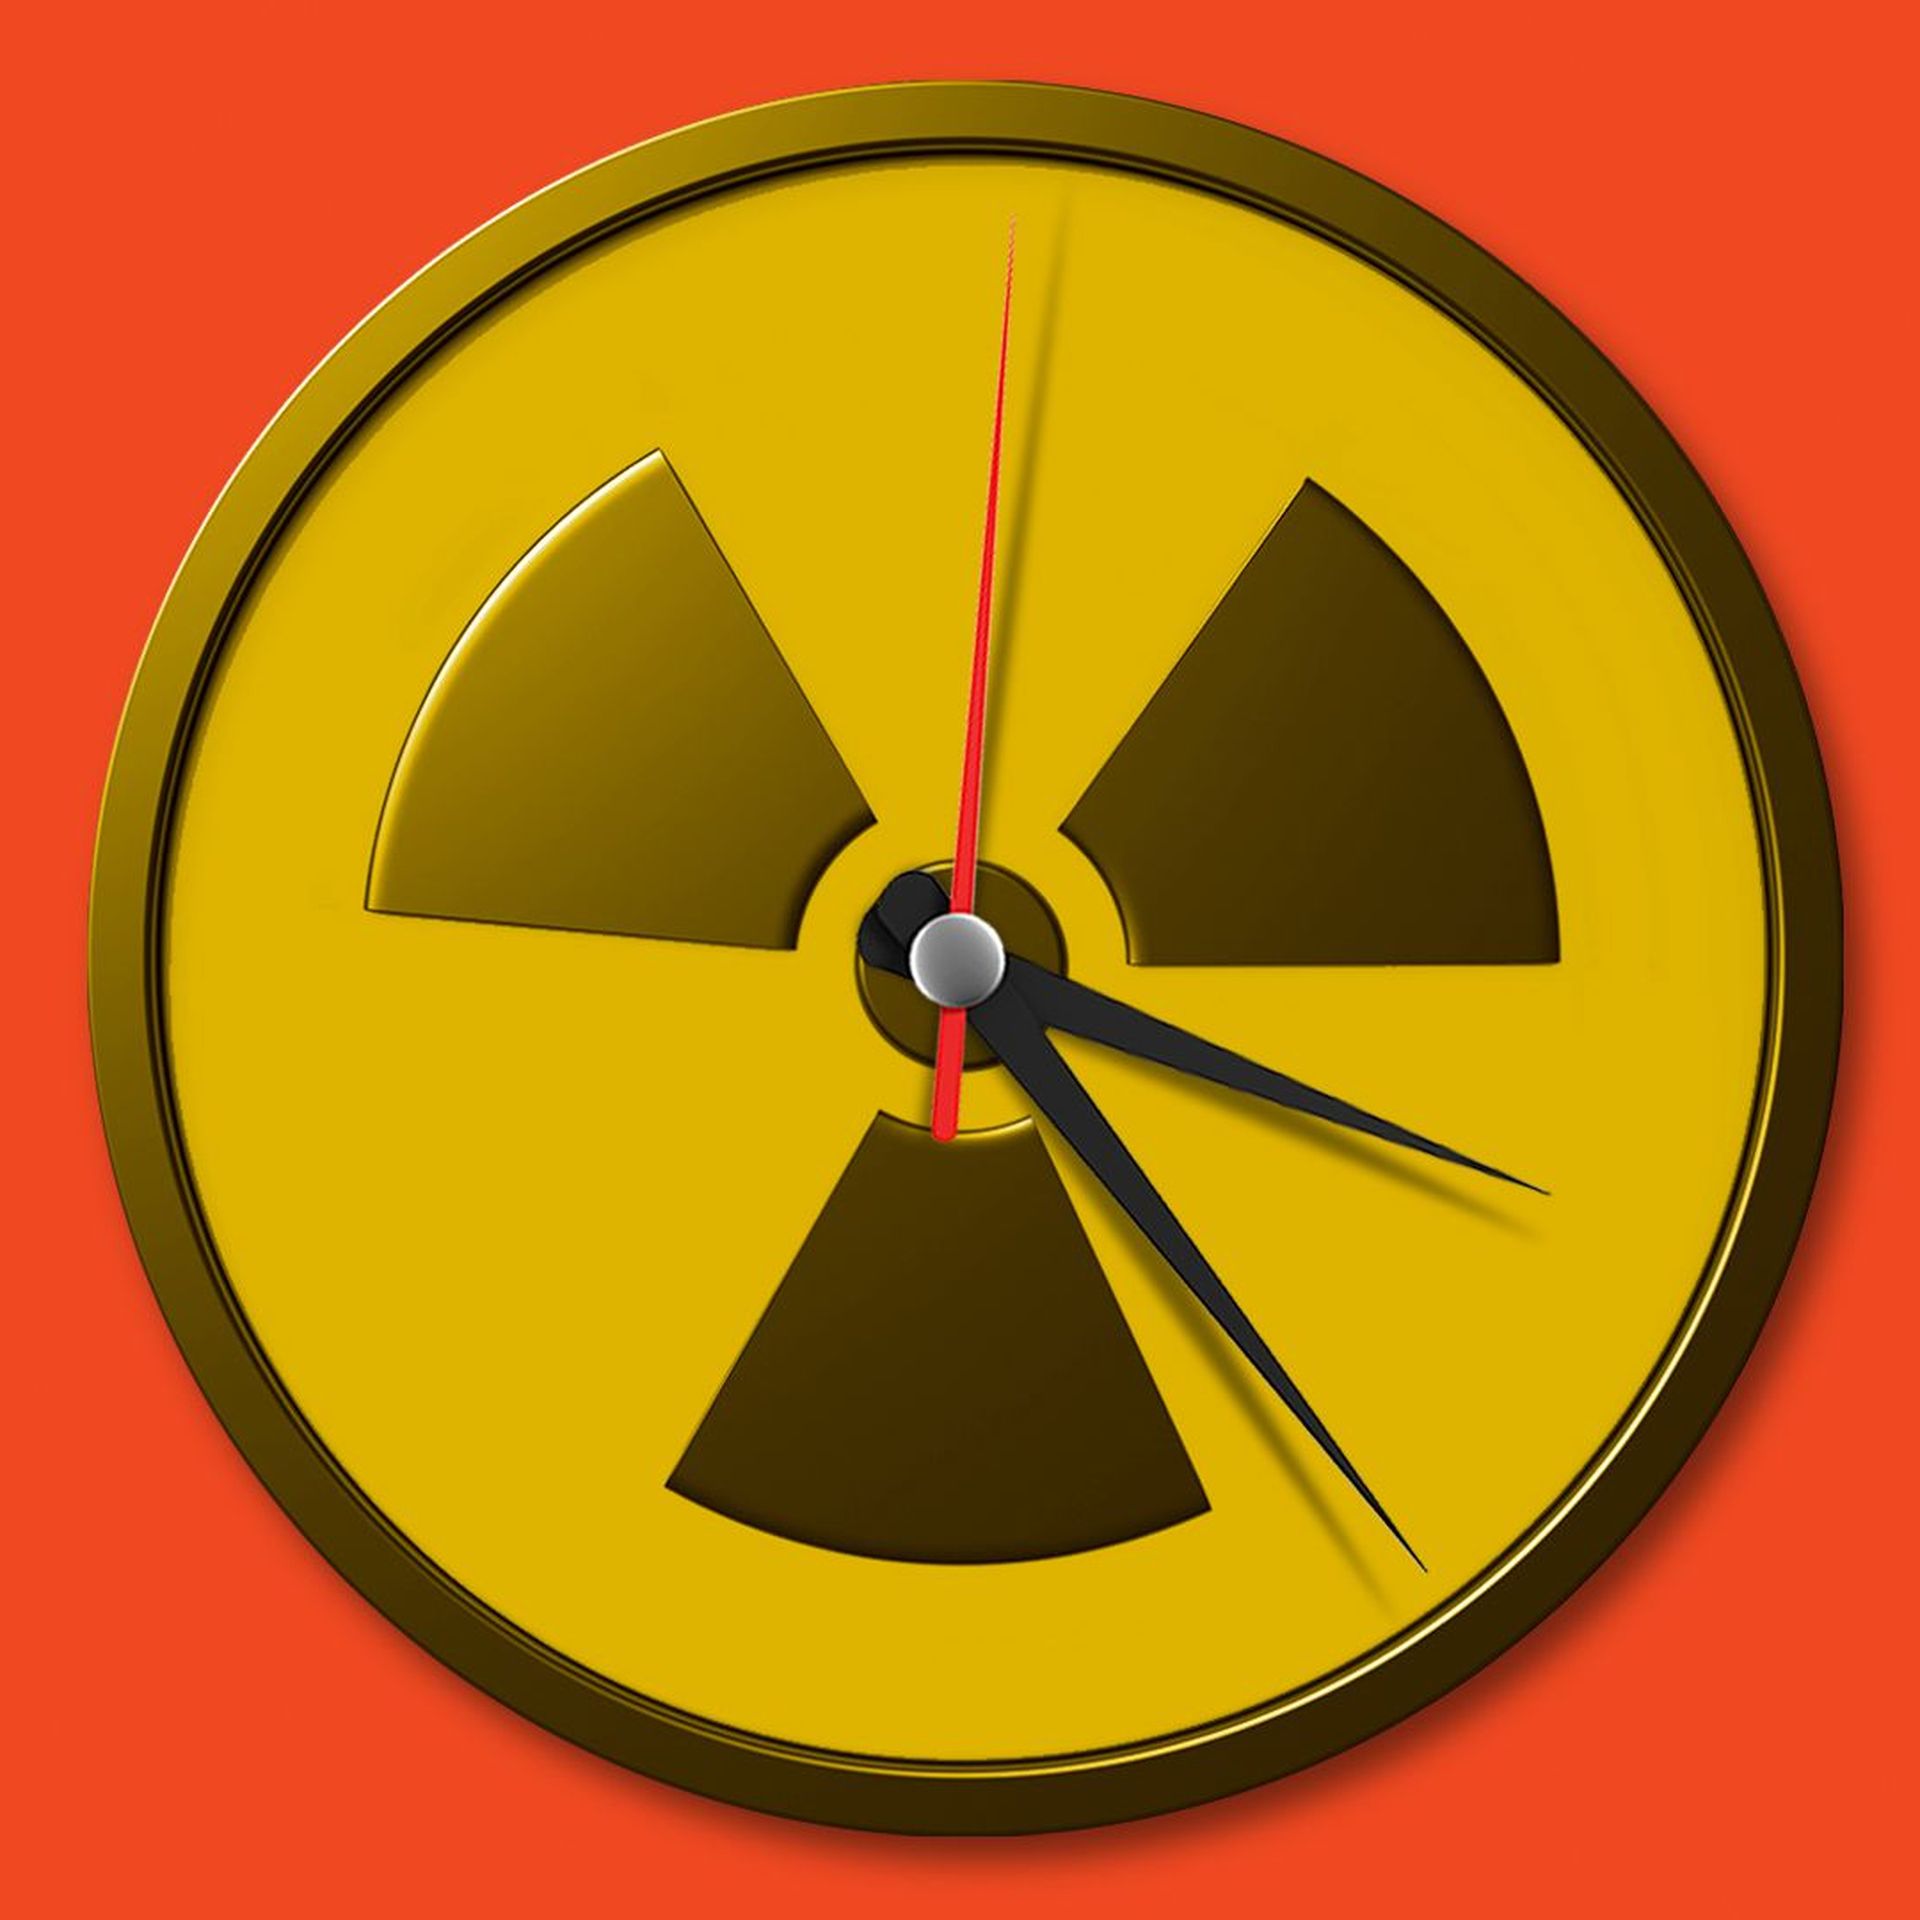 Illustration of a nuclear warning as a clock face